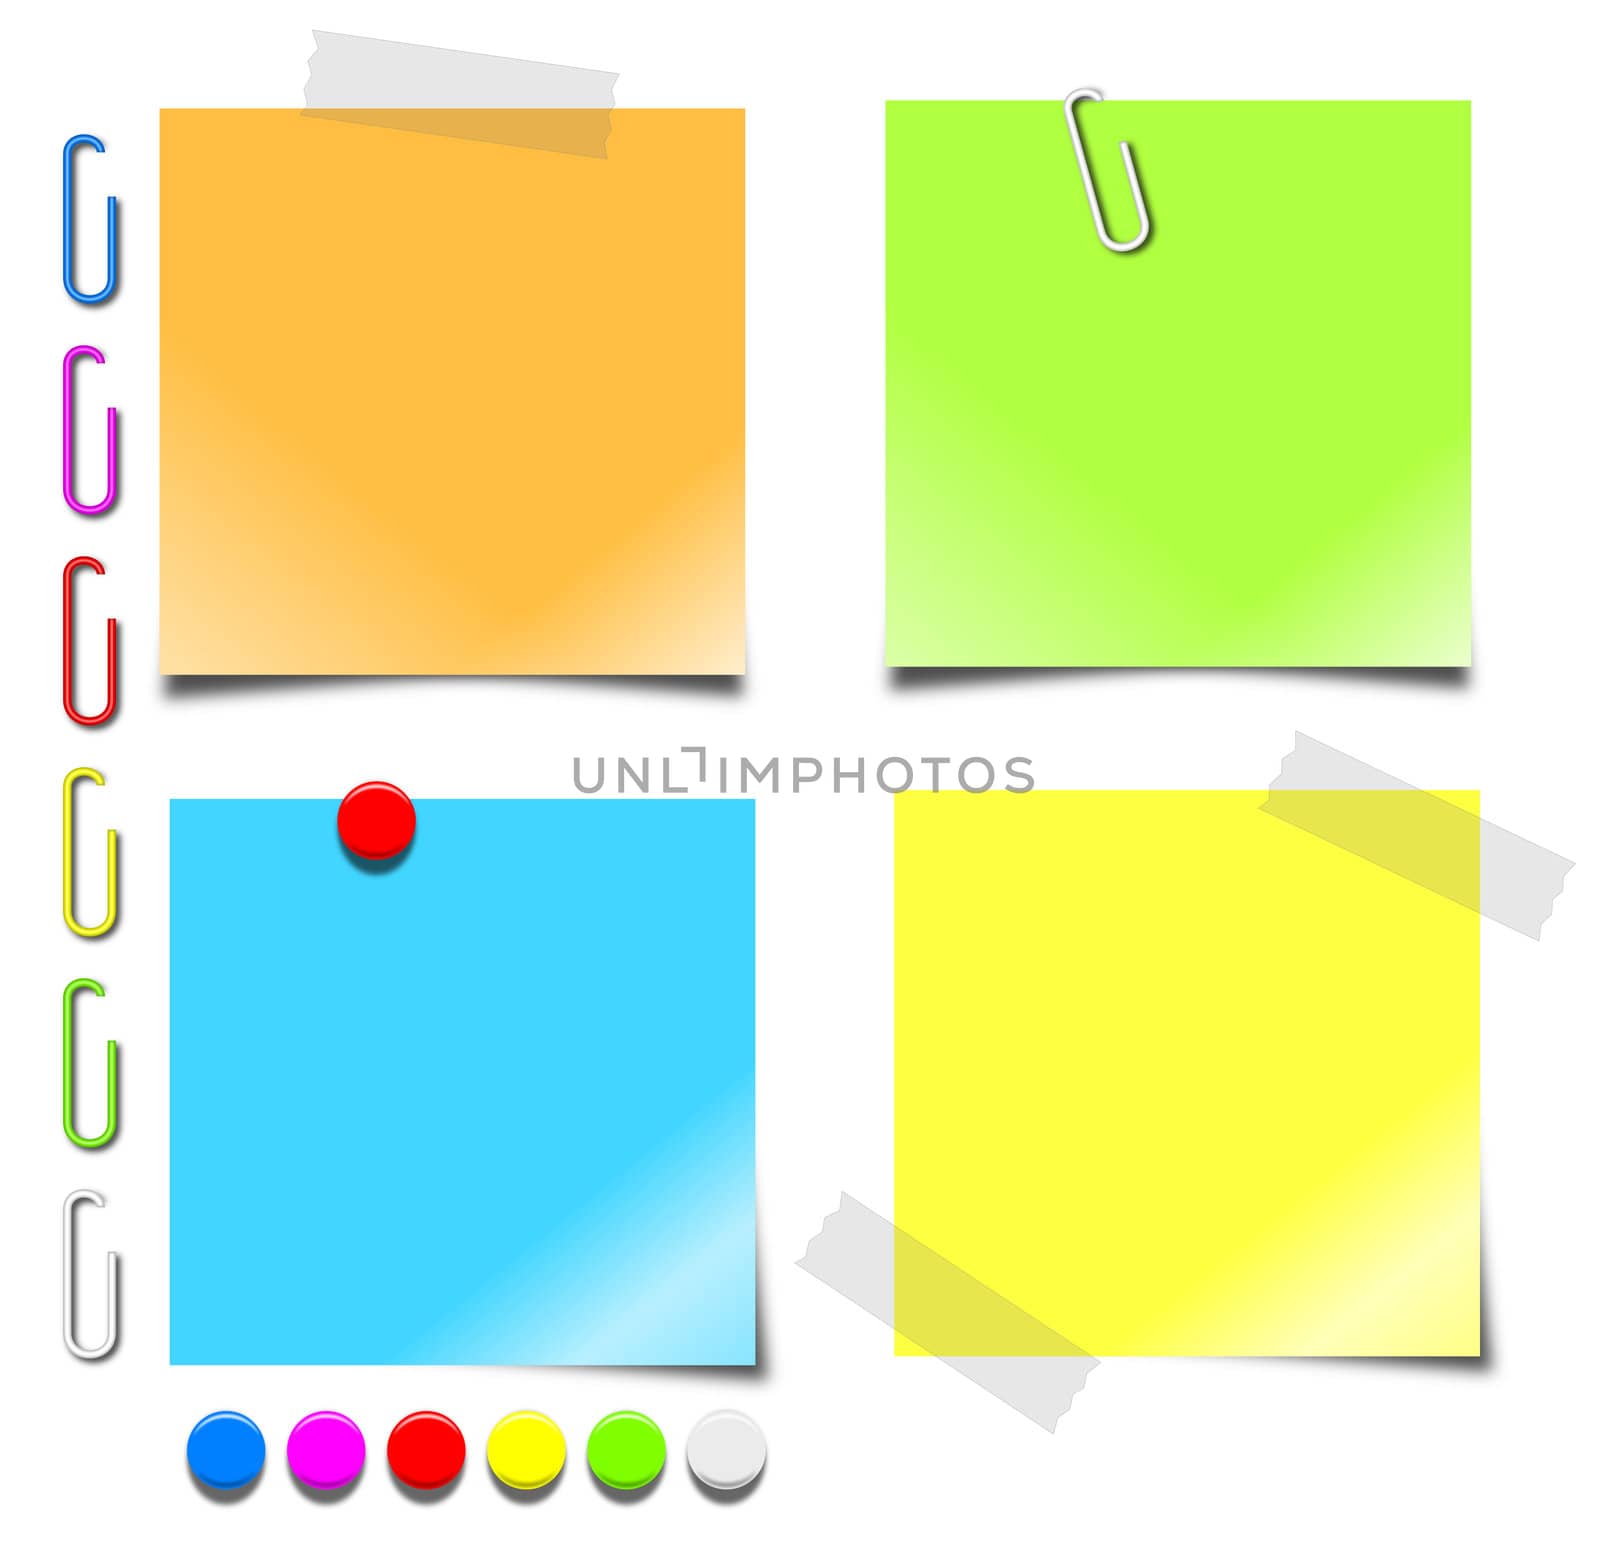 Colorful 3d graphics of blank notepaper, paperclips and pushpins.